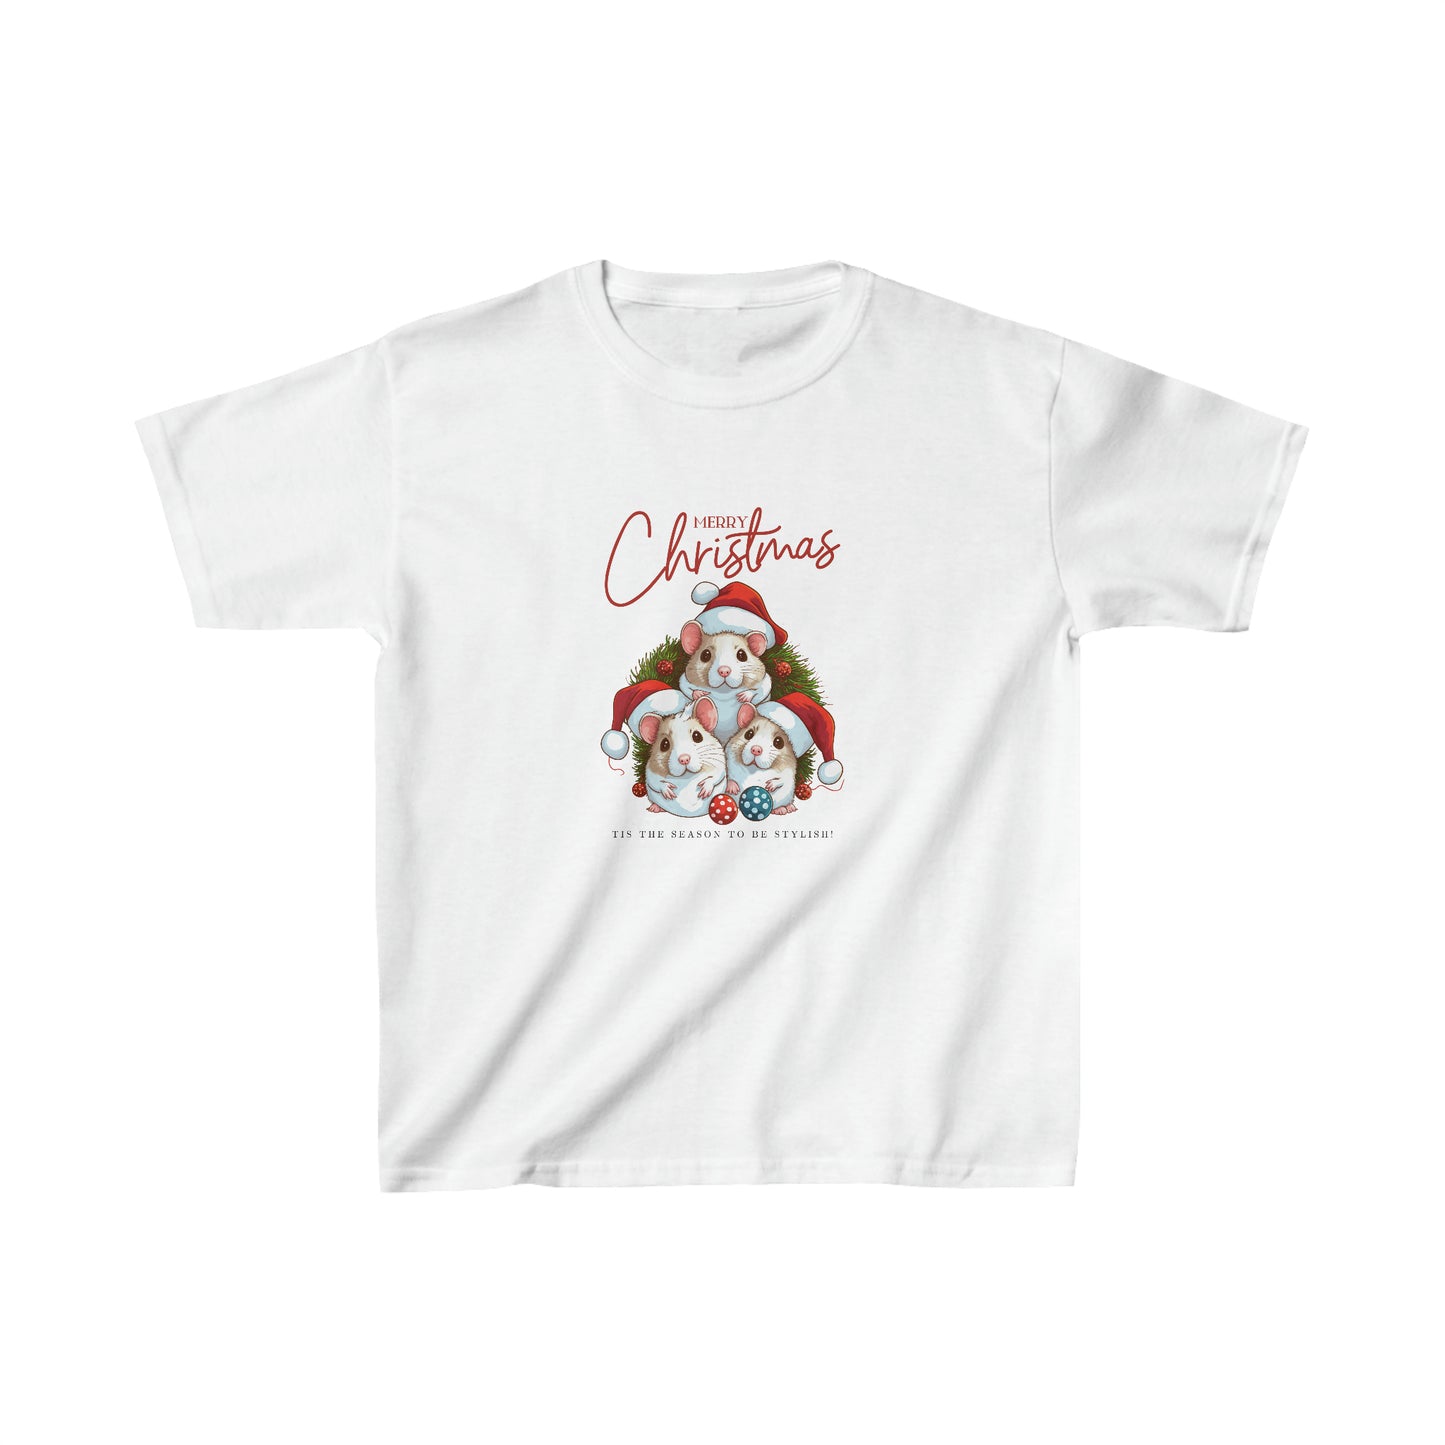 "Father Christmas with Babies Kids Heavy Cotton™ Tee - Festive Holiday Apparel, Santa Claus Design, Comfortable Cotton Blend, Trendy Christmas Fashion, Premium Quality, Seasonal Style for Kids, Gift-Ready Clothing, Cozy Christmas Wear, Holiday Gift Idea